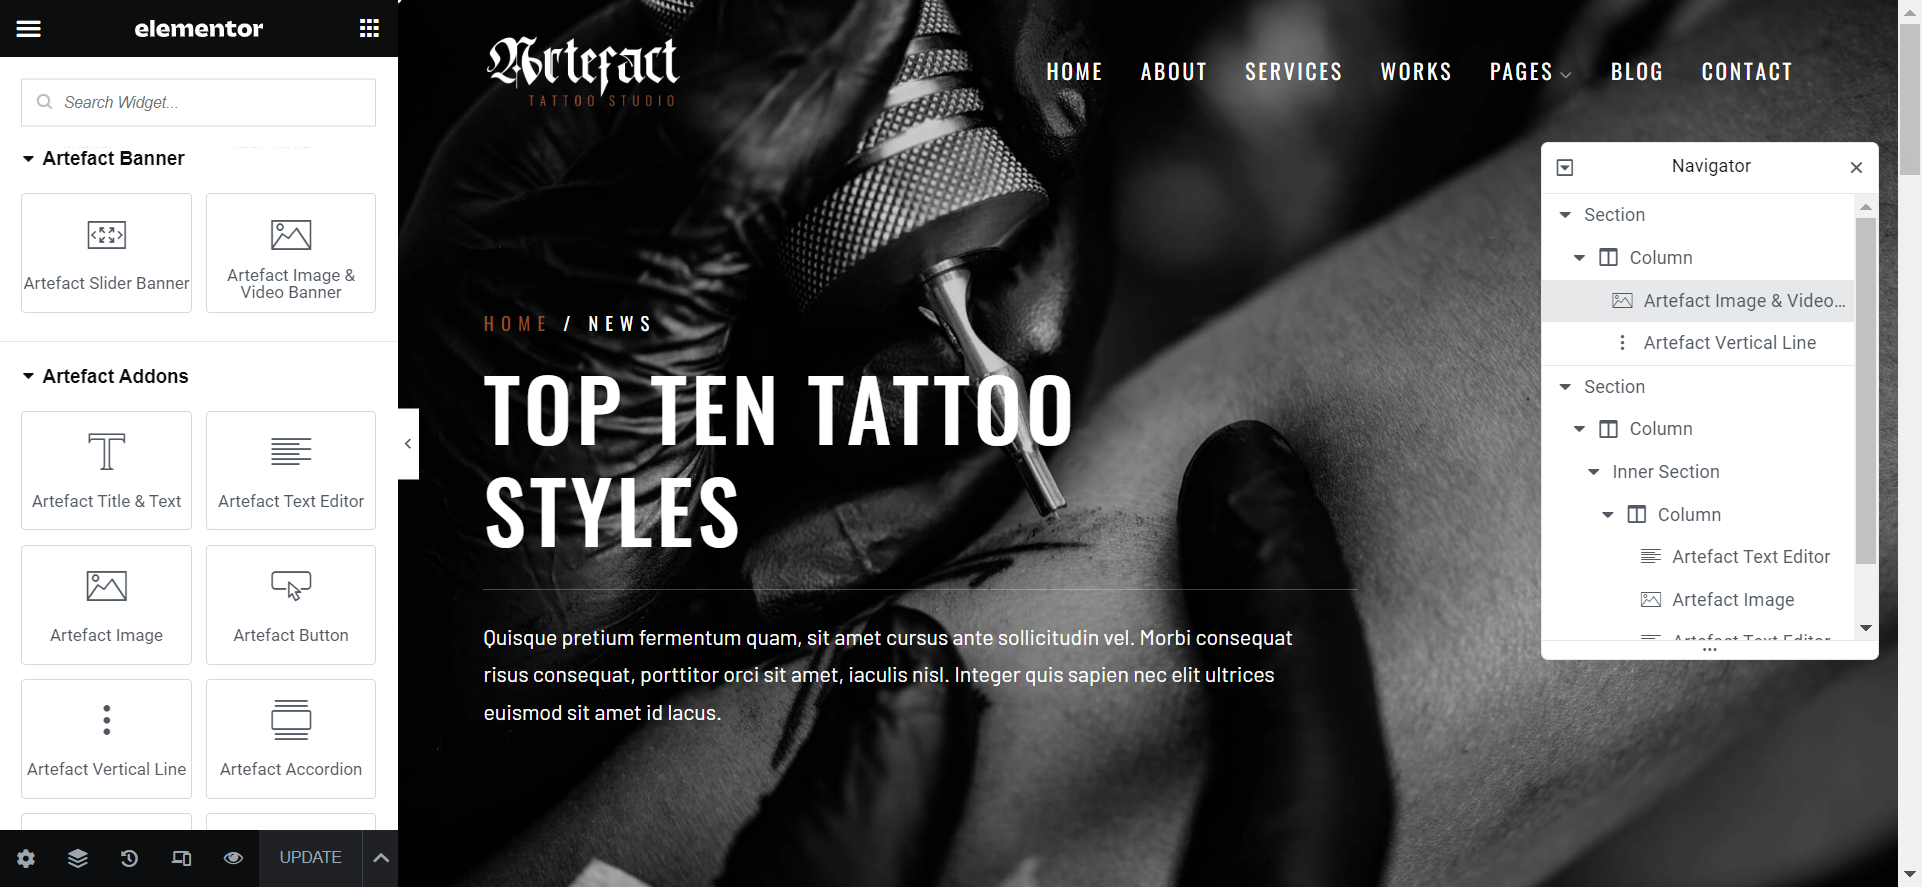 Edit-Top-Ten-Tattoo-Styles-with-Elementor